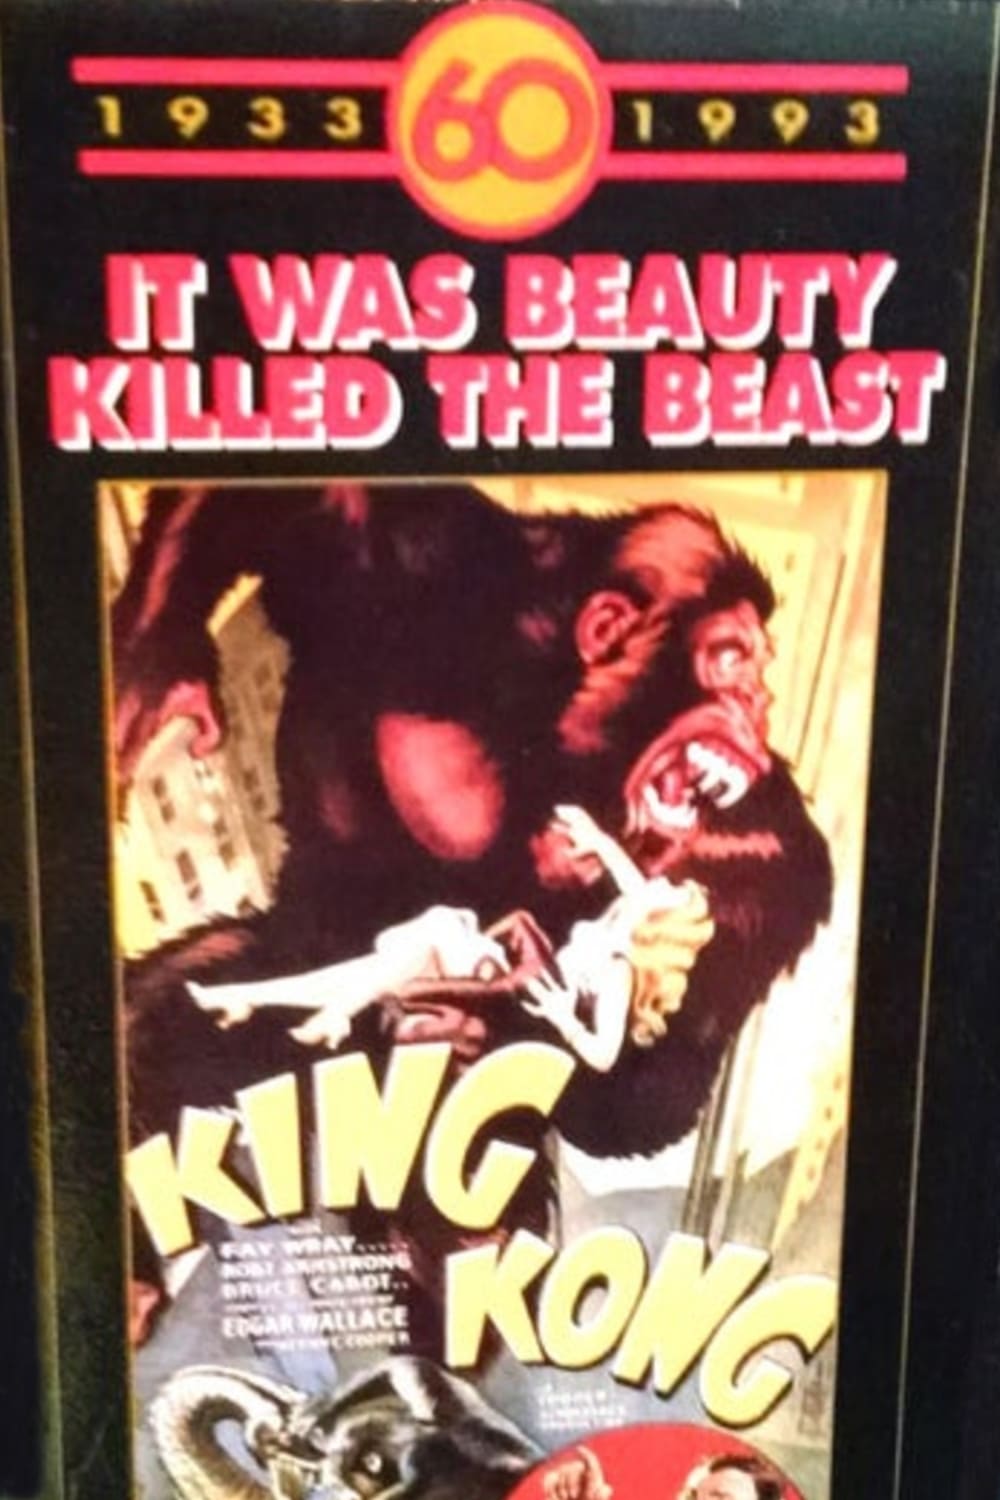 King Kong 60th Anniversary Special: "It was beauty killed the beast." (1992)